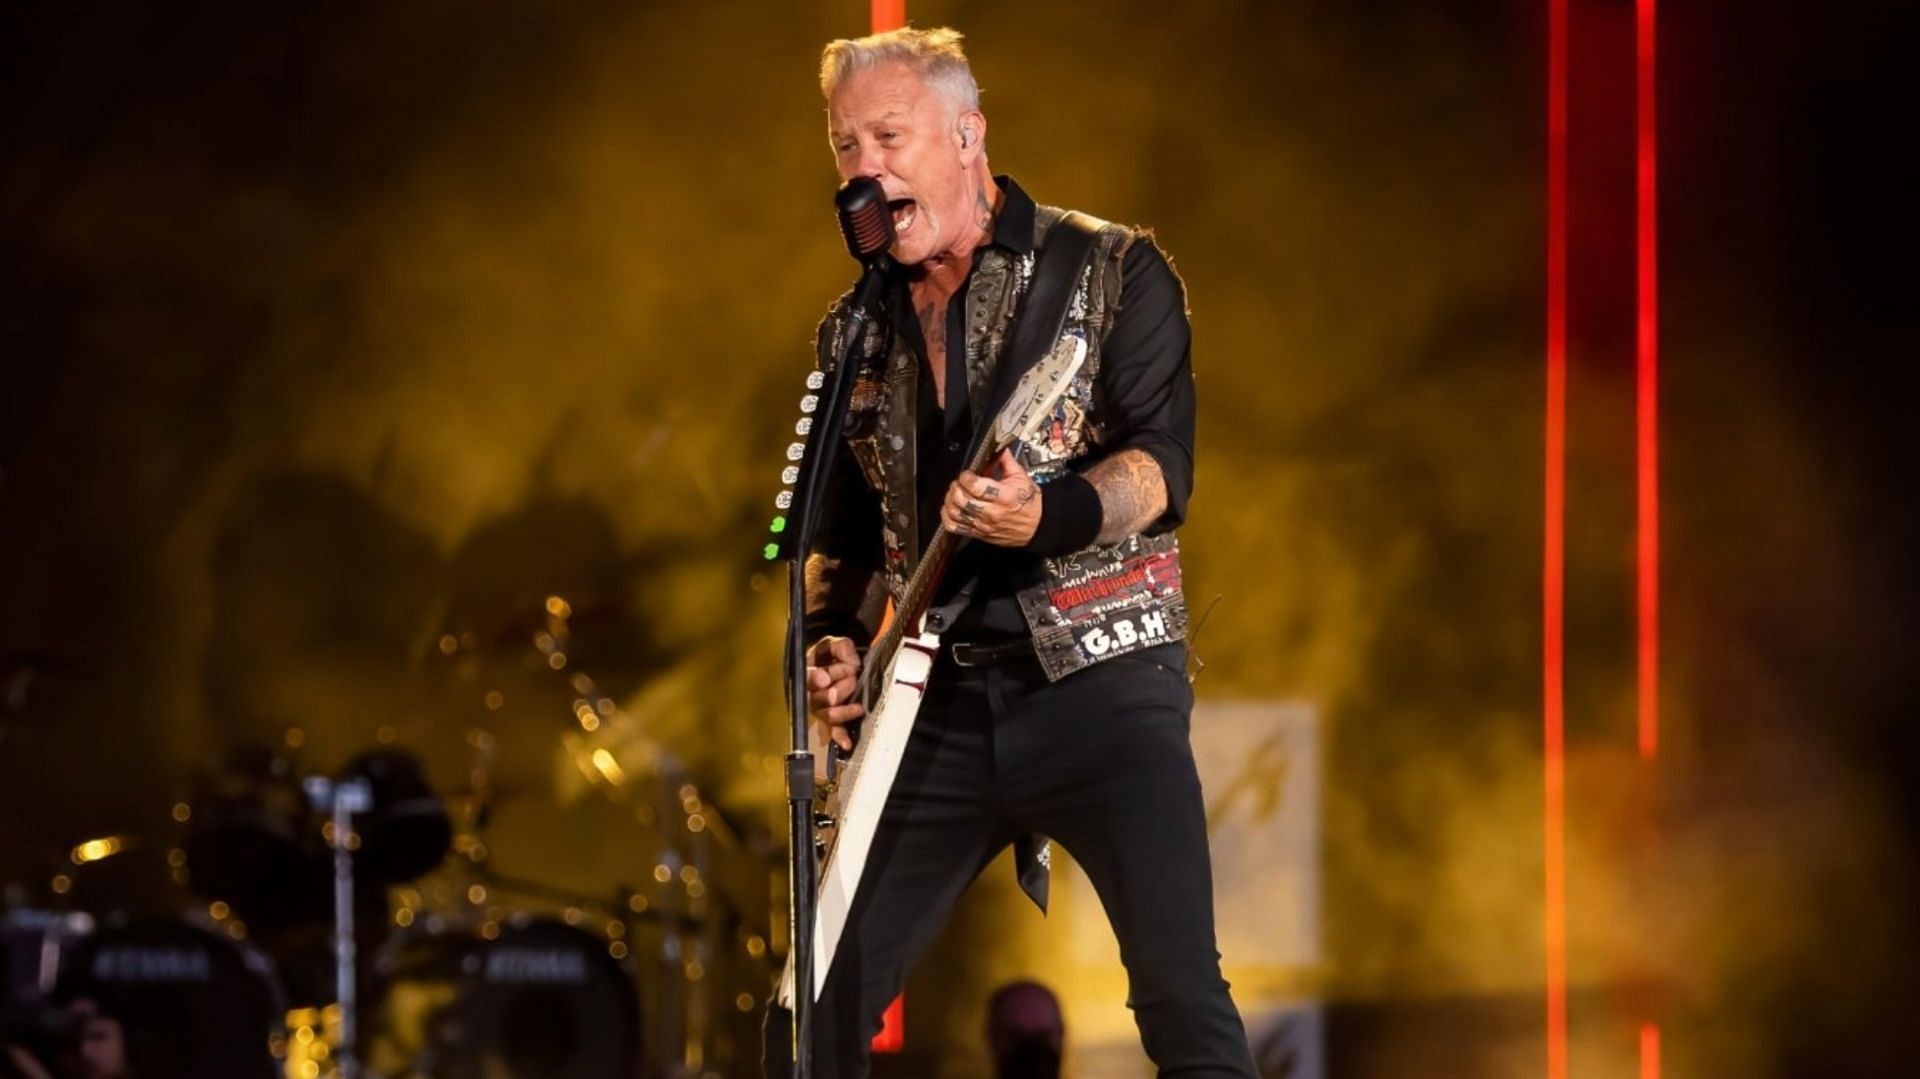 Metallica Helping Hands benefit concert 2022: Tickets, price, where to buy and more